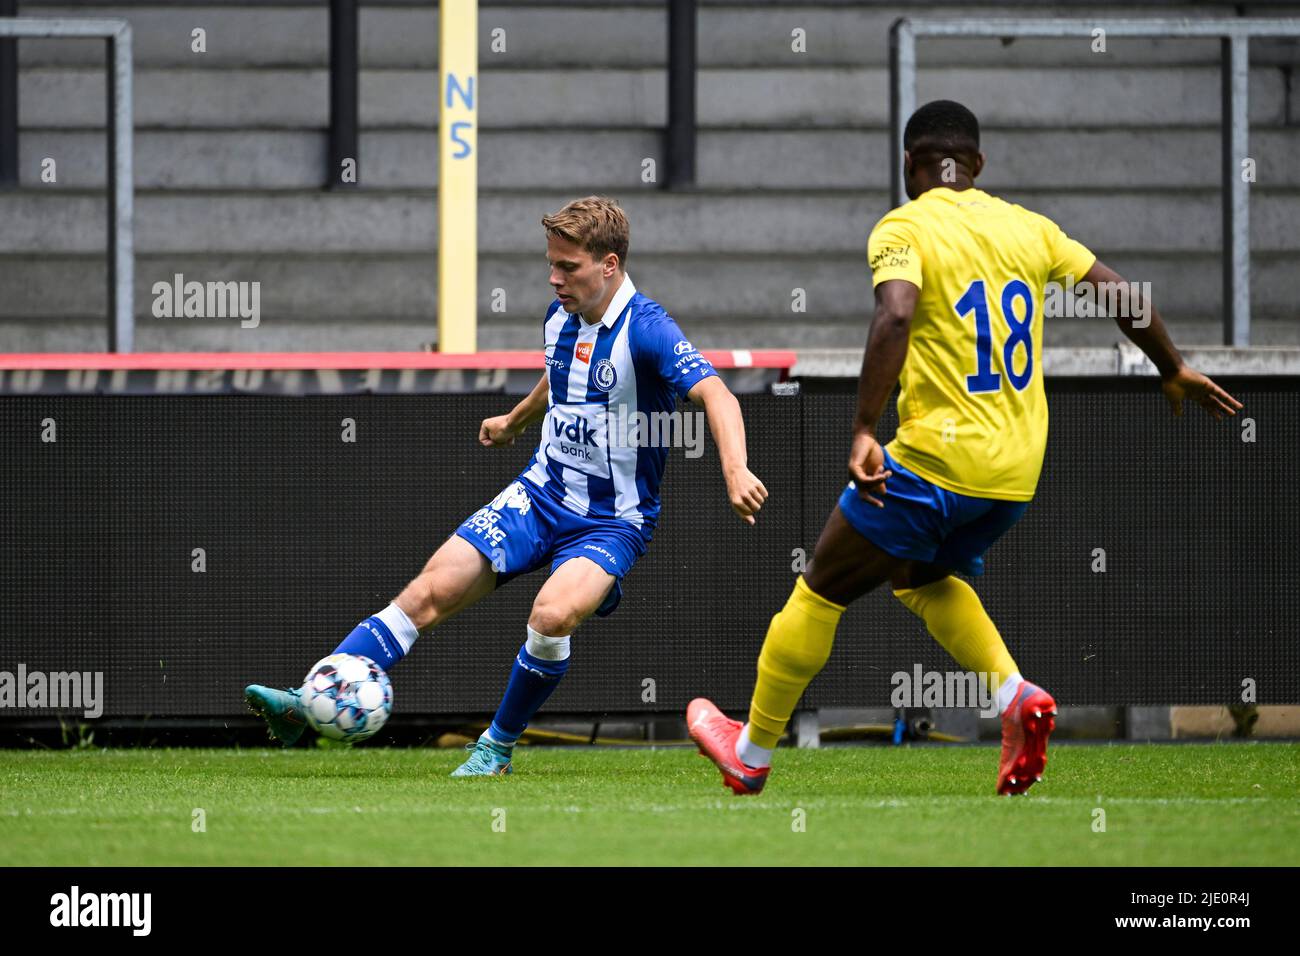 Gent's Matisse Samoise and Westerlo's Kouya Mabea pictured in action during a friendly soccer match between Belgian Jupiler Pro League team KVC Westerlo and KAA Gent, in Westerlo Friday 24 June 2022. BELGA PHOTO TOM GOYVAERTS Credit: Belga News Agency/Alamy Live News Credit: Belga News Agency/Alamy Live News Stock Photo